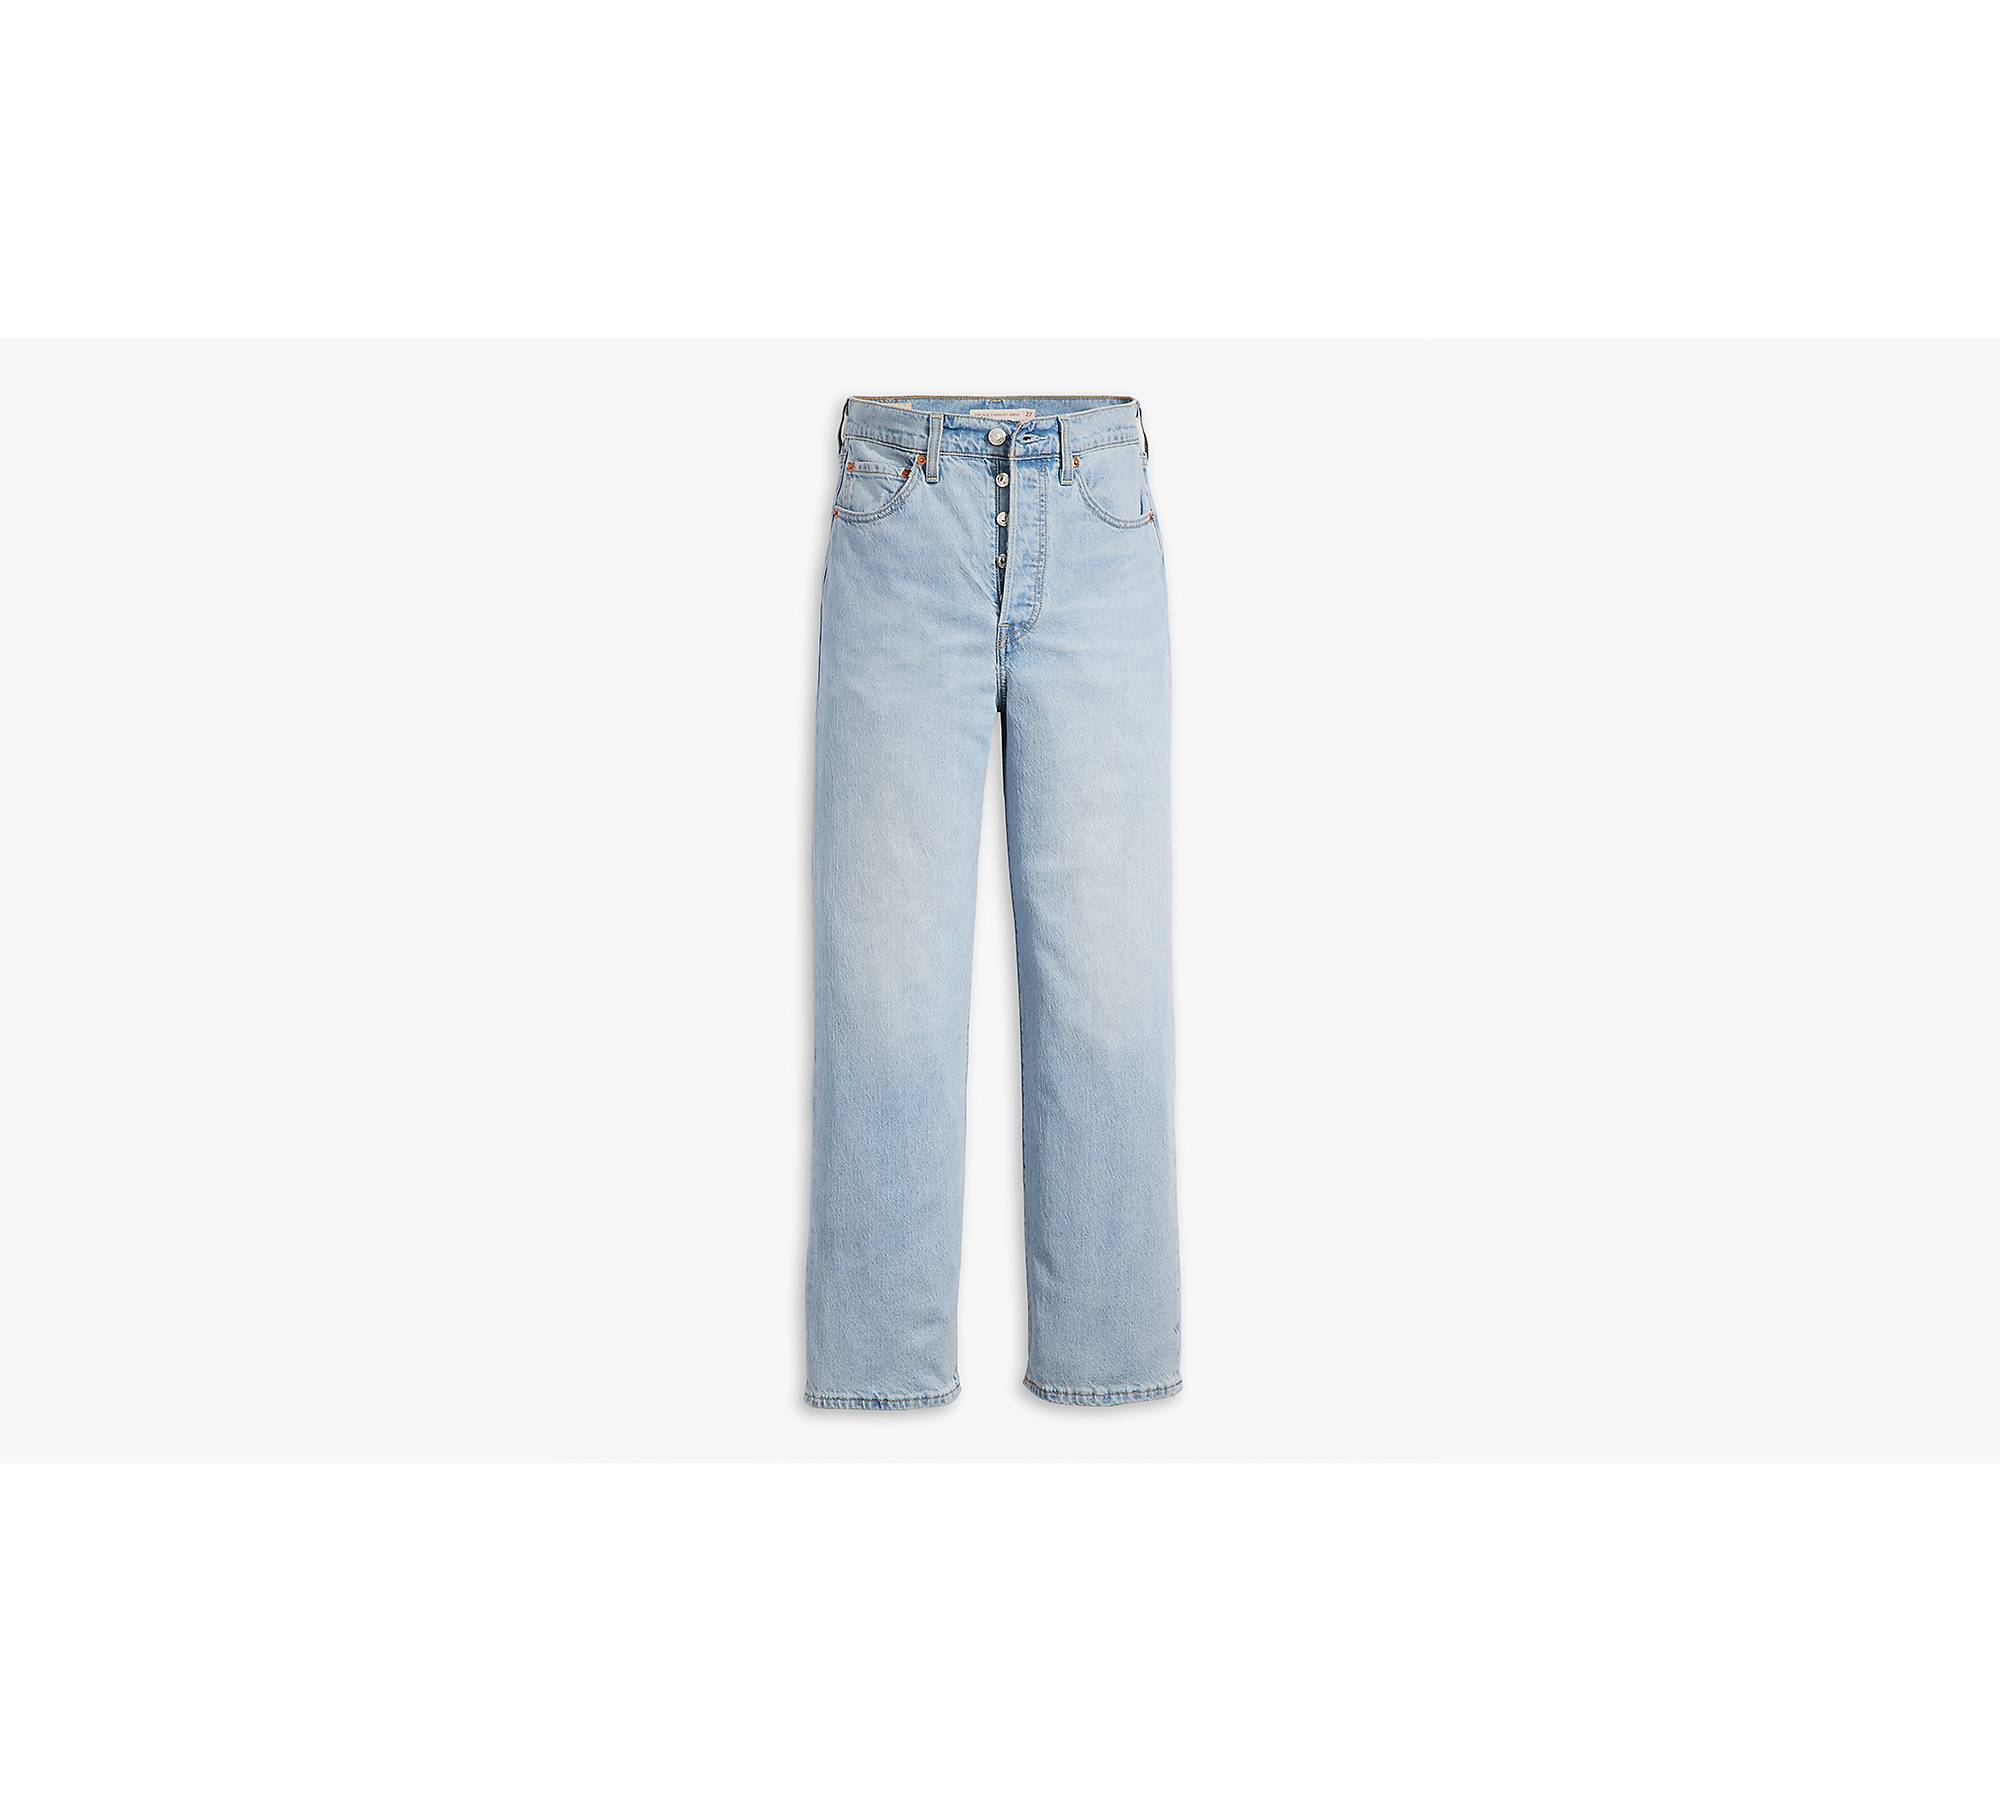 Levi's Ribcage Straight Ankle Jeans in Light Wash • Shop American Threads  Women's Trendy Online Boutique – americanthreads